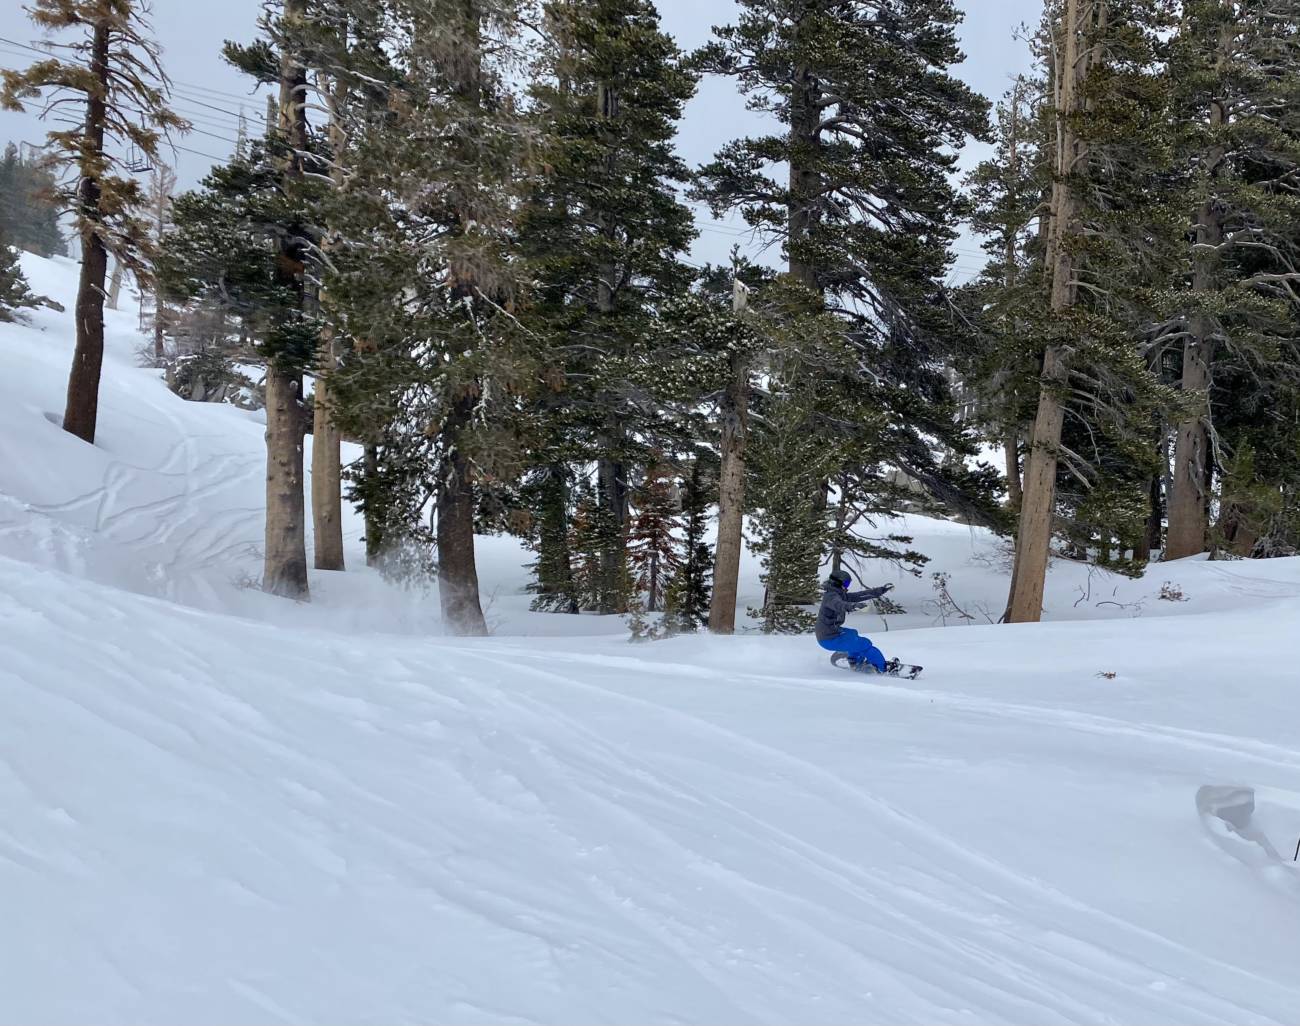 Snowboarding at Palisades Tahoe after 3" of new snow